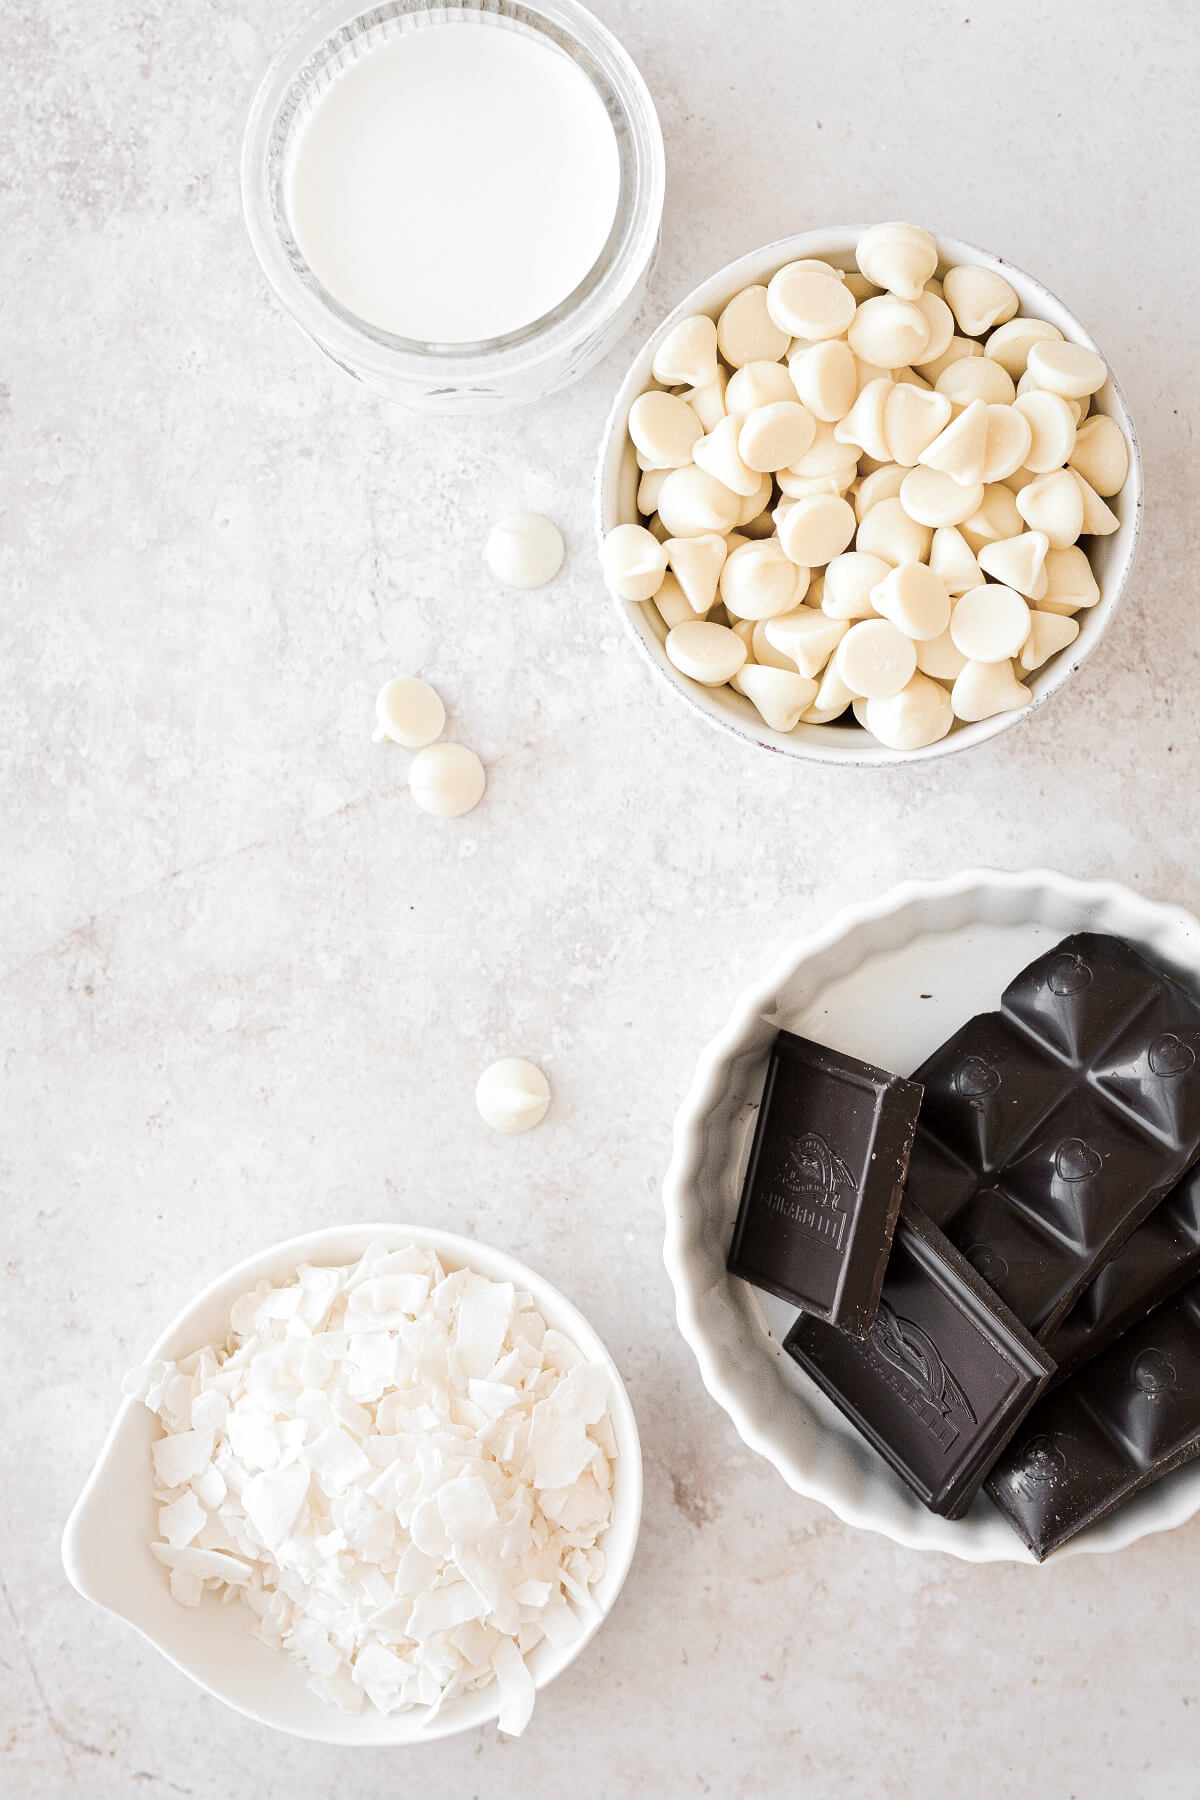 Ingredients for making white chocolate coconut truffles.